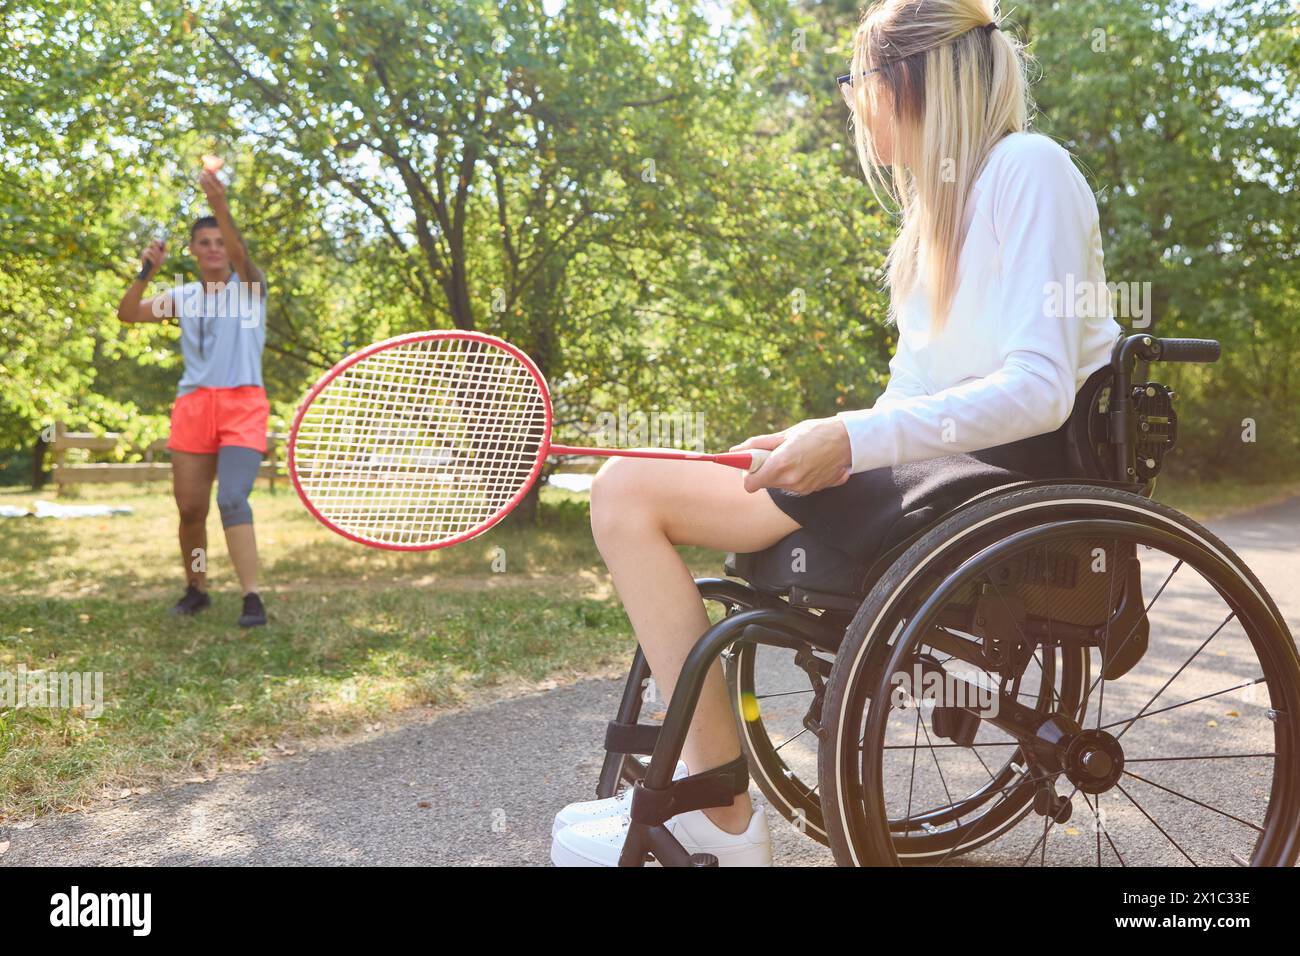 A woman using a wheelchair and her friend playing badminton in a park, depicting joy and active lifestyle despite physical challenges. Stock Photo